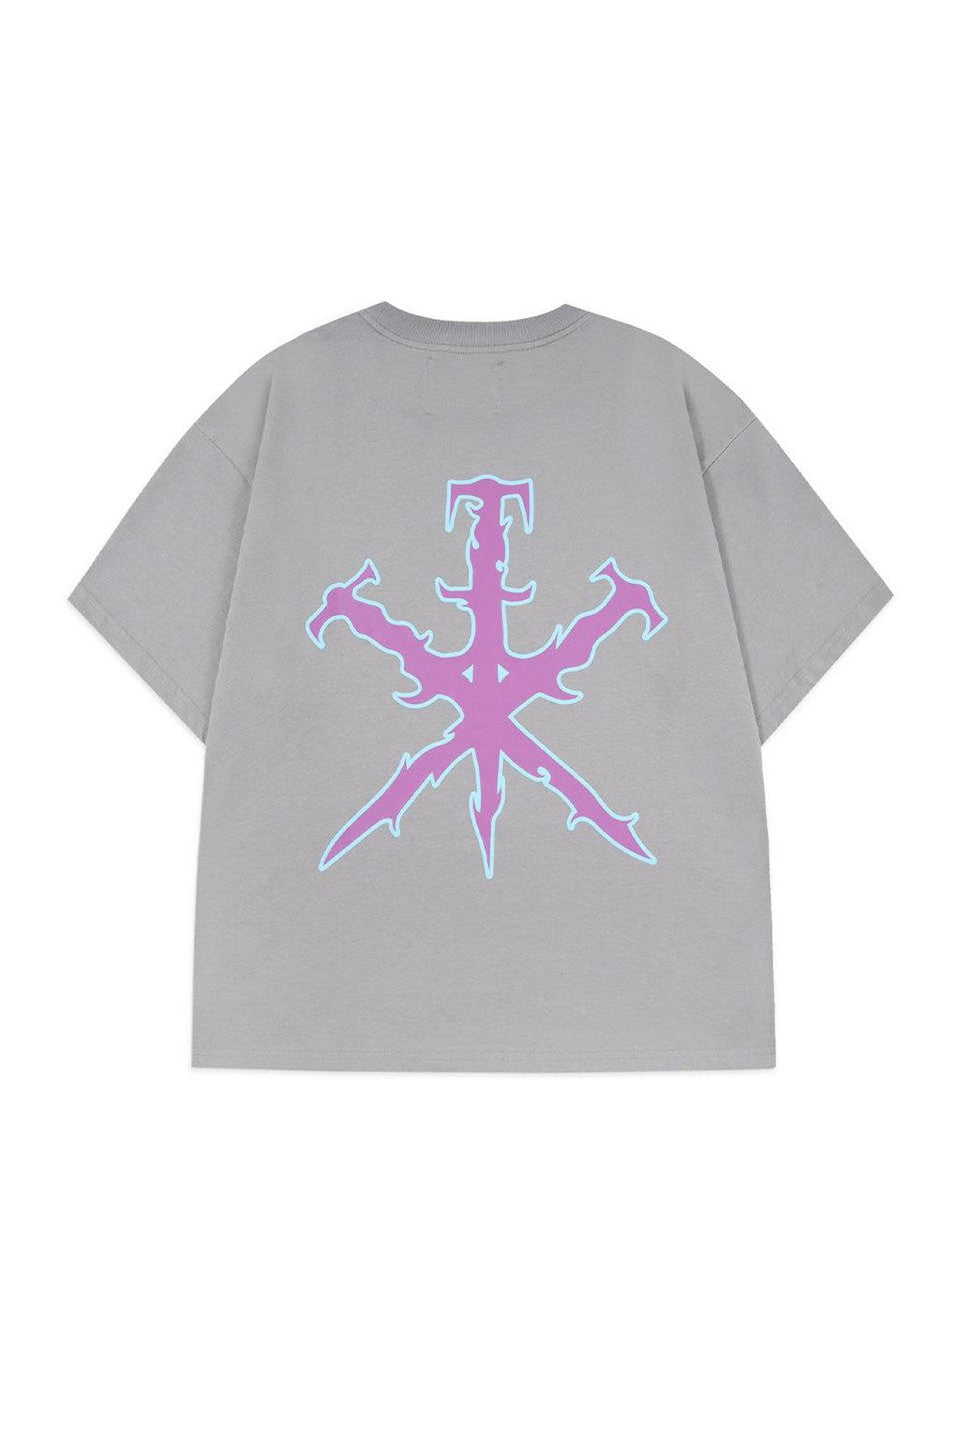 Unknown London - Unknown Tribal Dagger Tee アンノウンロンドン T